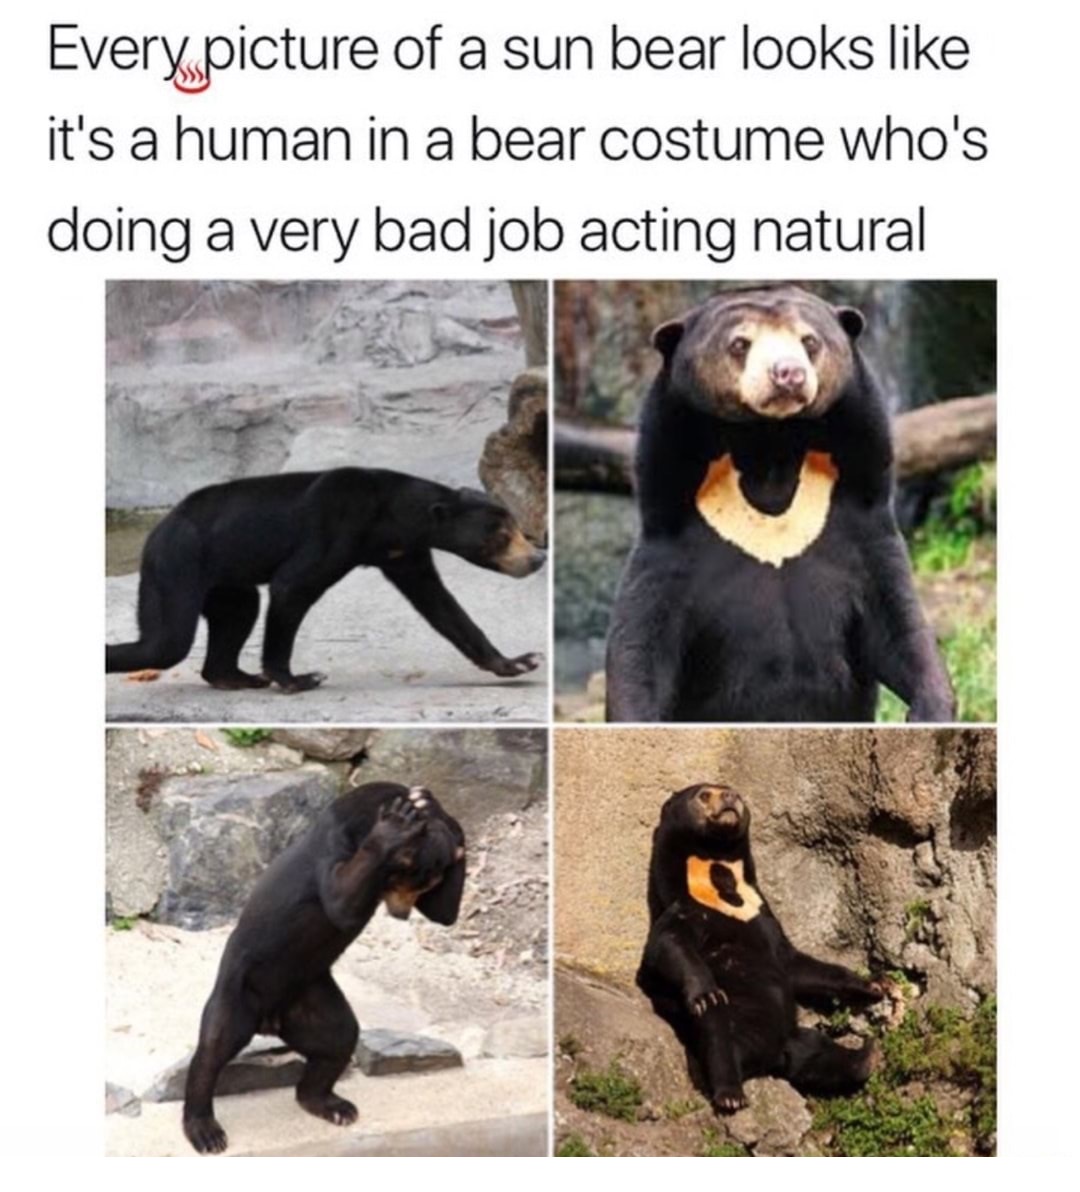 Thursday meme about sun bear looks like human - Every picture of a sun bear looks it's a human in a bear costume who's doing a very bad job acting natural